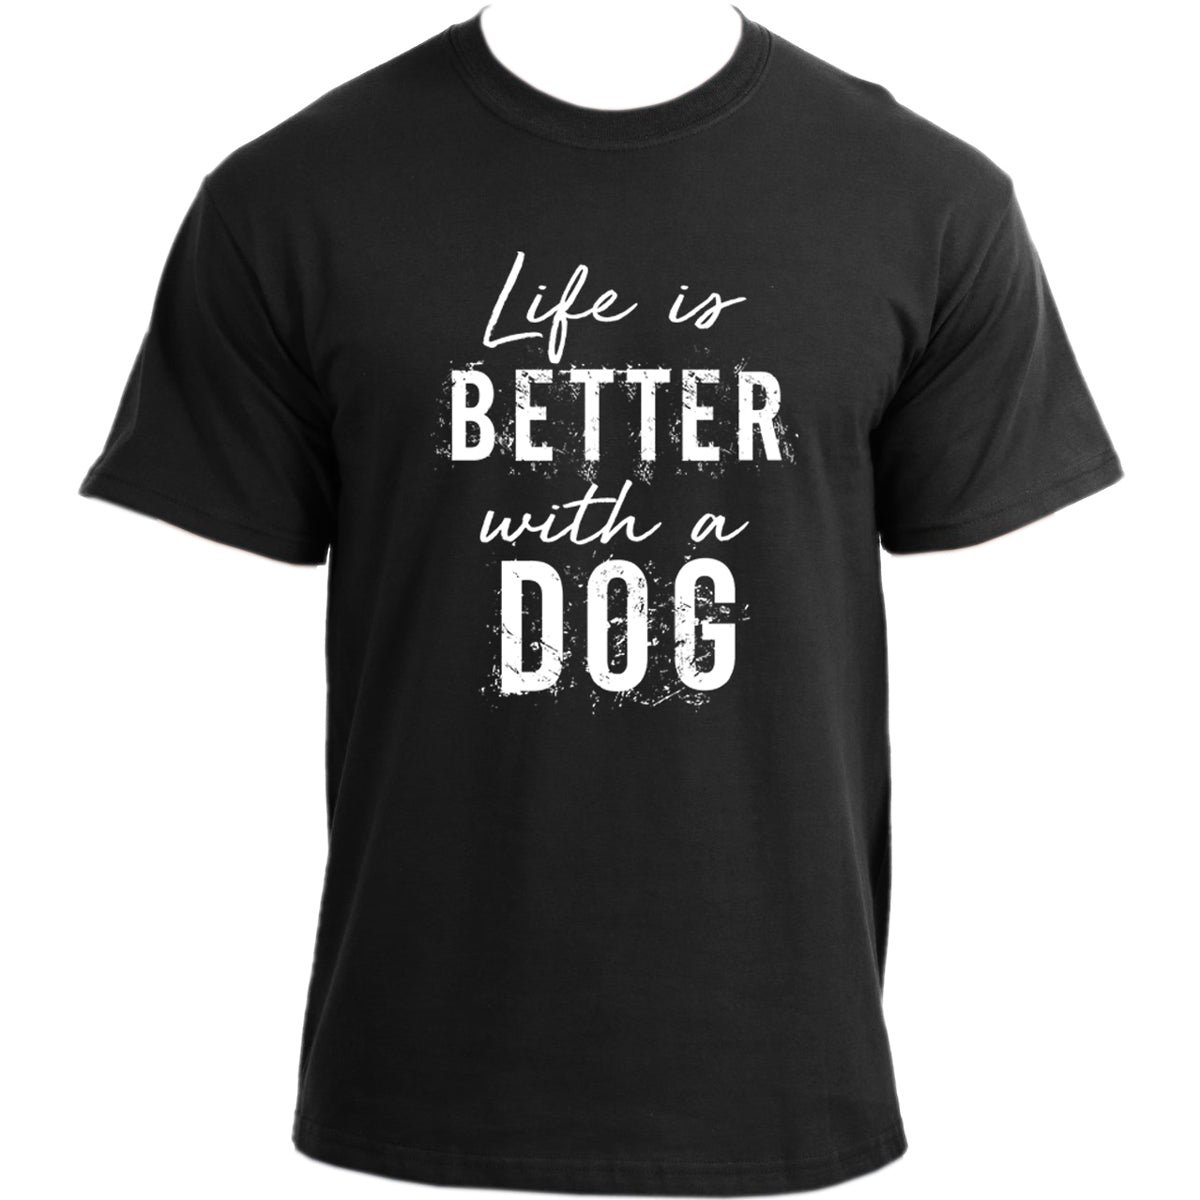 Life is better with a dog T-shirt I Dog Owner TShirt I Dog Dad Funny T-shirts For Men